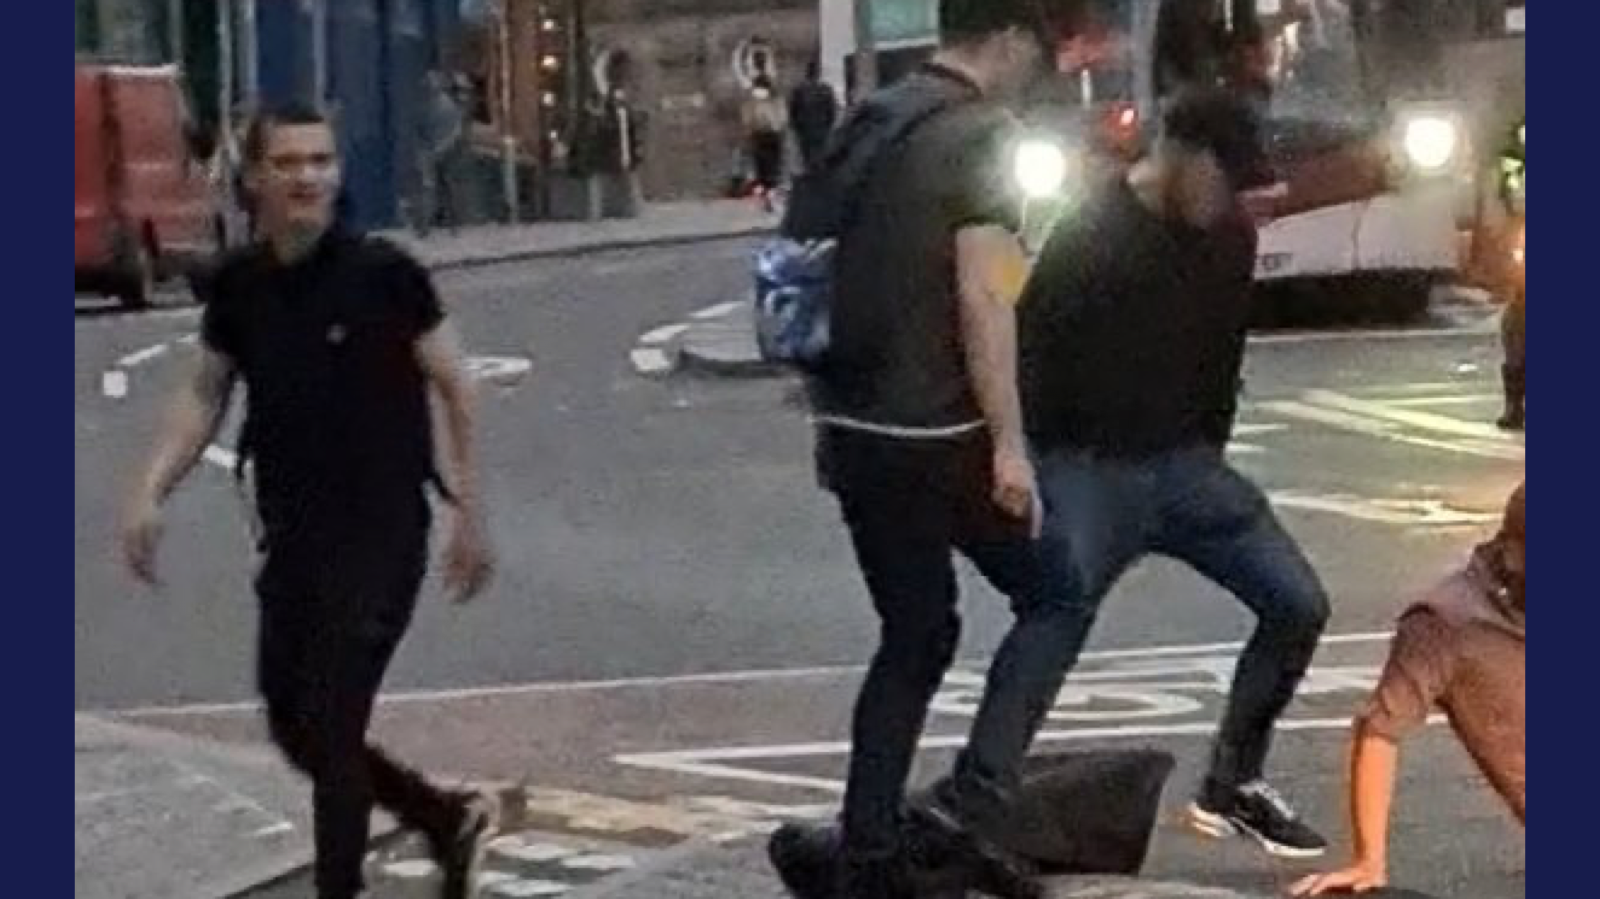 Three of the four alleged assailants as they continue attacking the victim